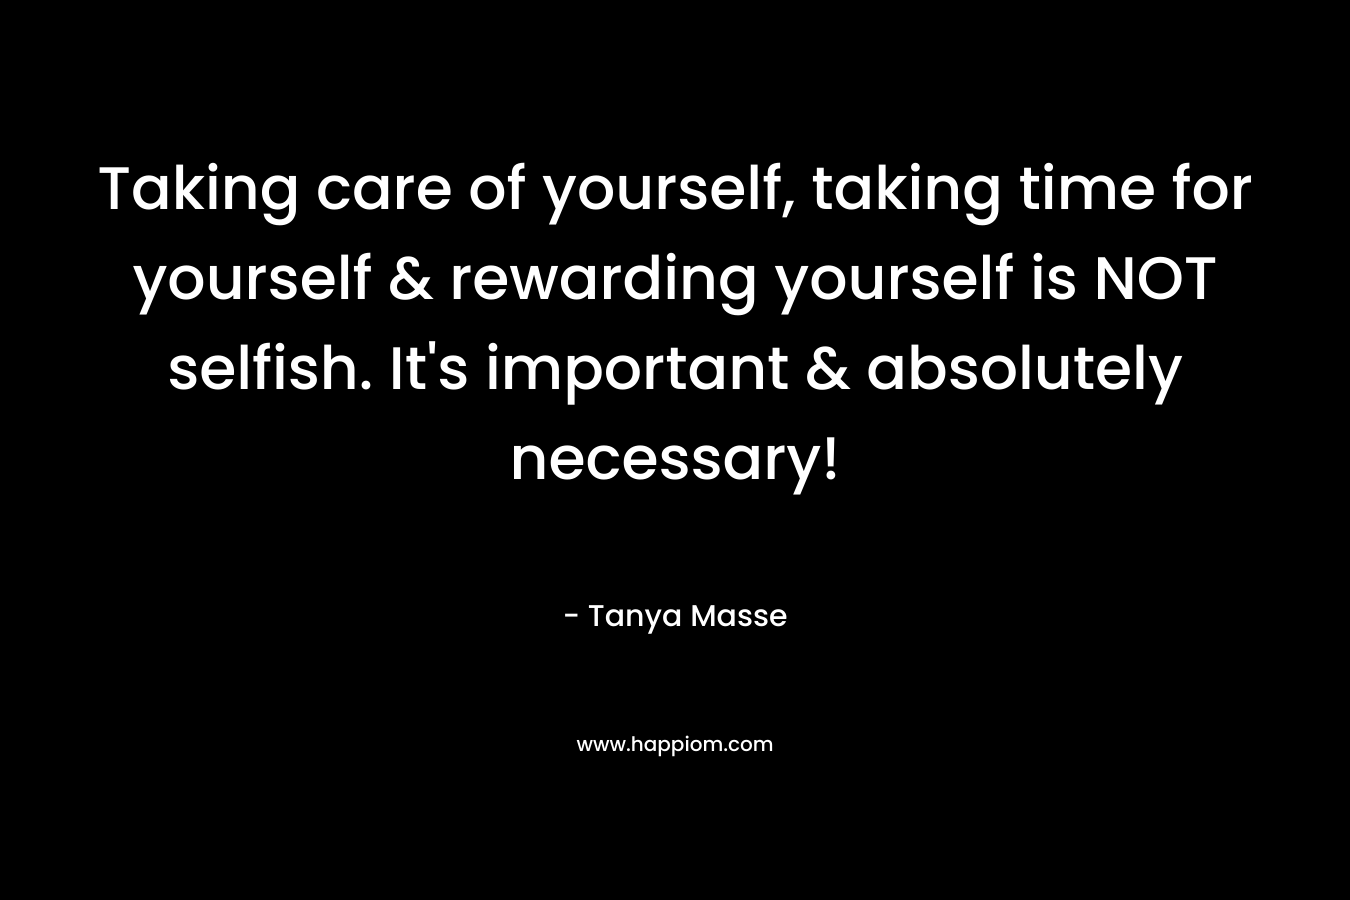 Taking care of yourself, taking time for yourself & rewarding yourself is NOT selfish. It's important & absolutely necessary!